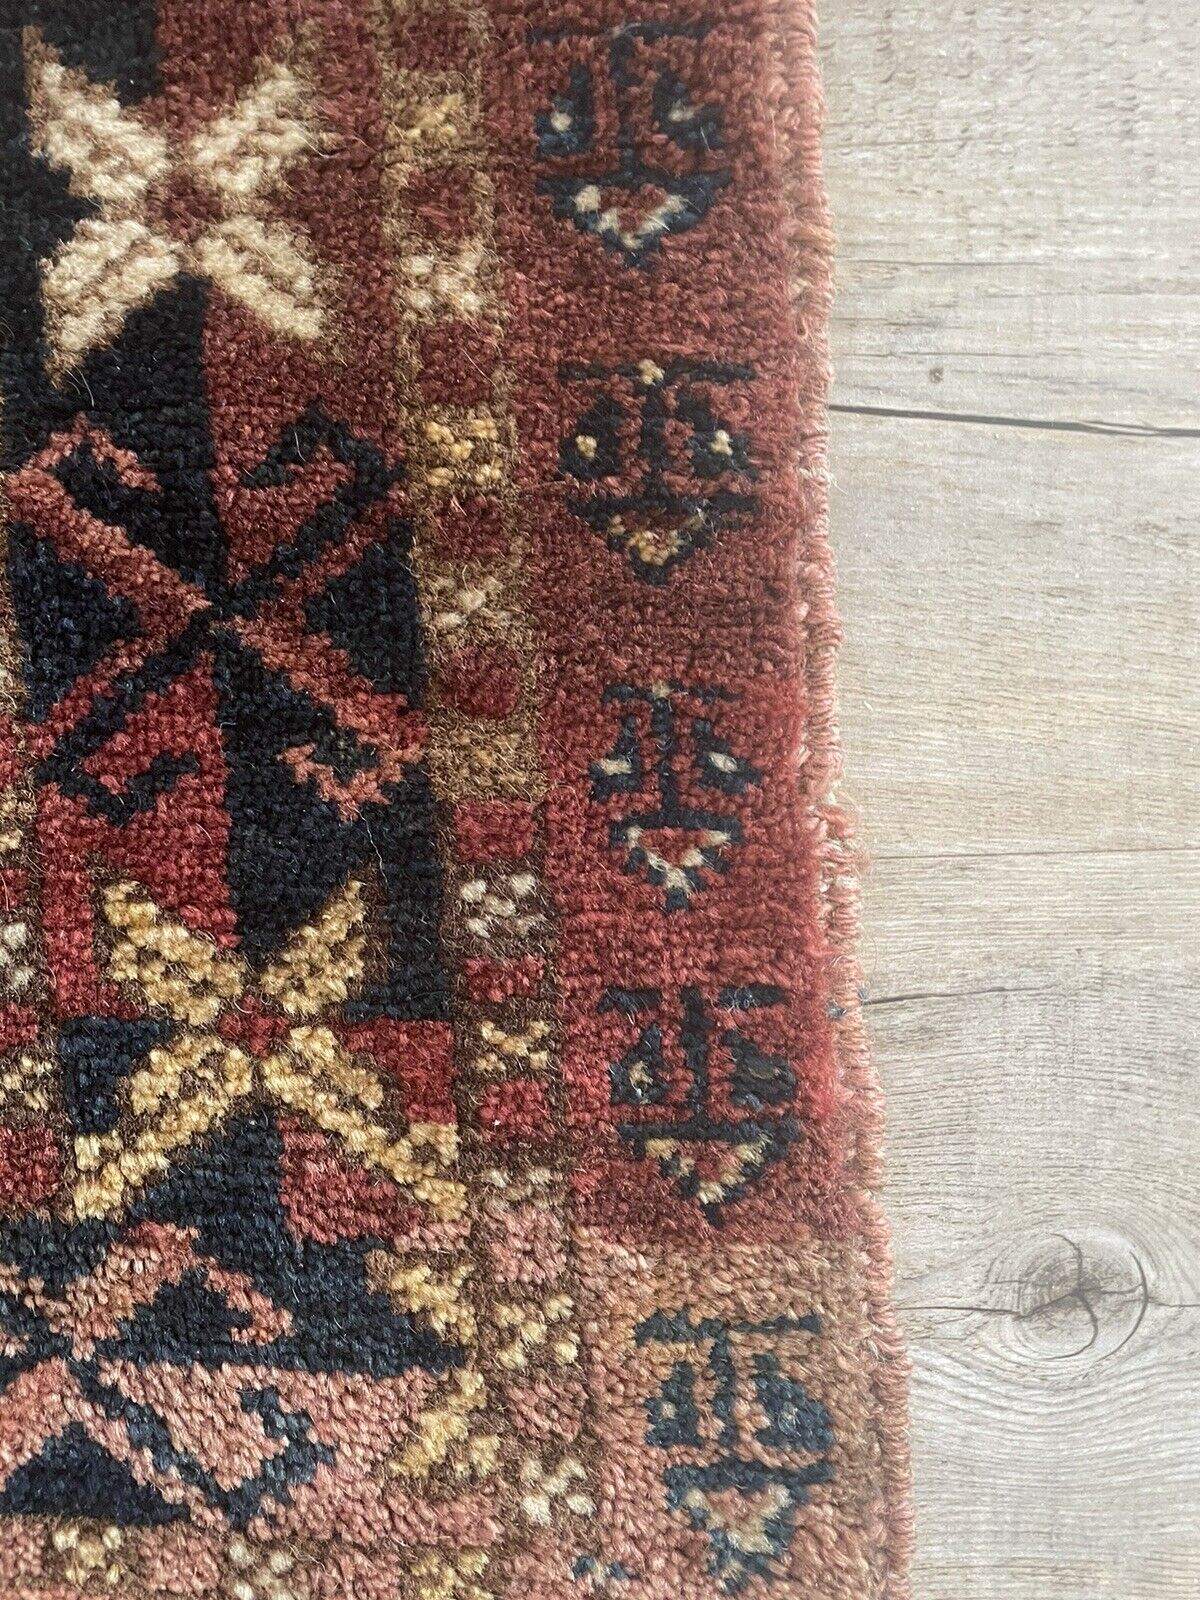 Close-up of woolen texture on Handmade Antique Afghan Beshir Collectible Chuval Rug - Detailed view emphasizing the woolen texture of the rug, adding to its authenticity and cultural significance.